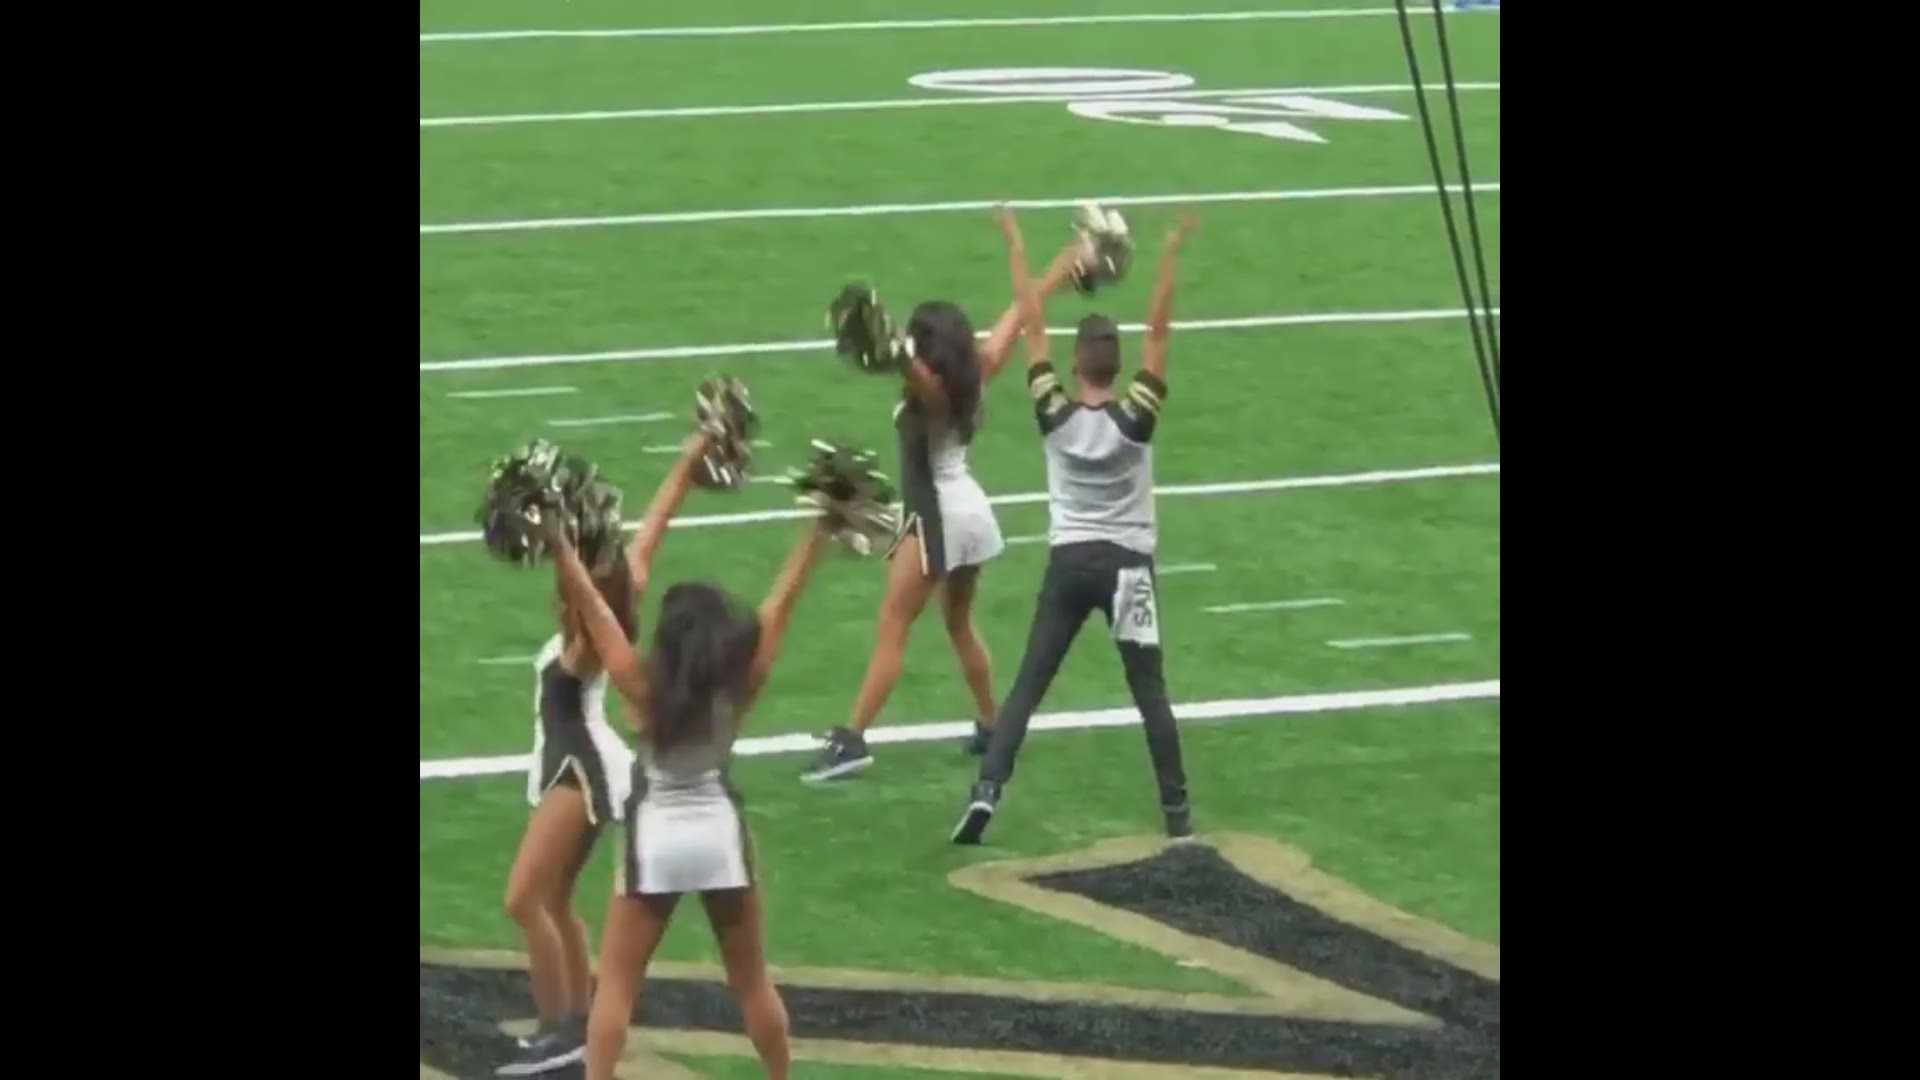 Jesse Hernandez's first performance with the Saintsations